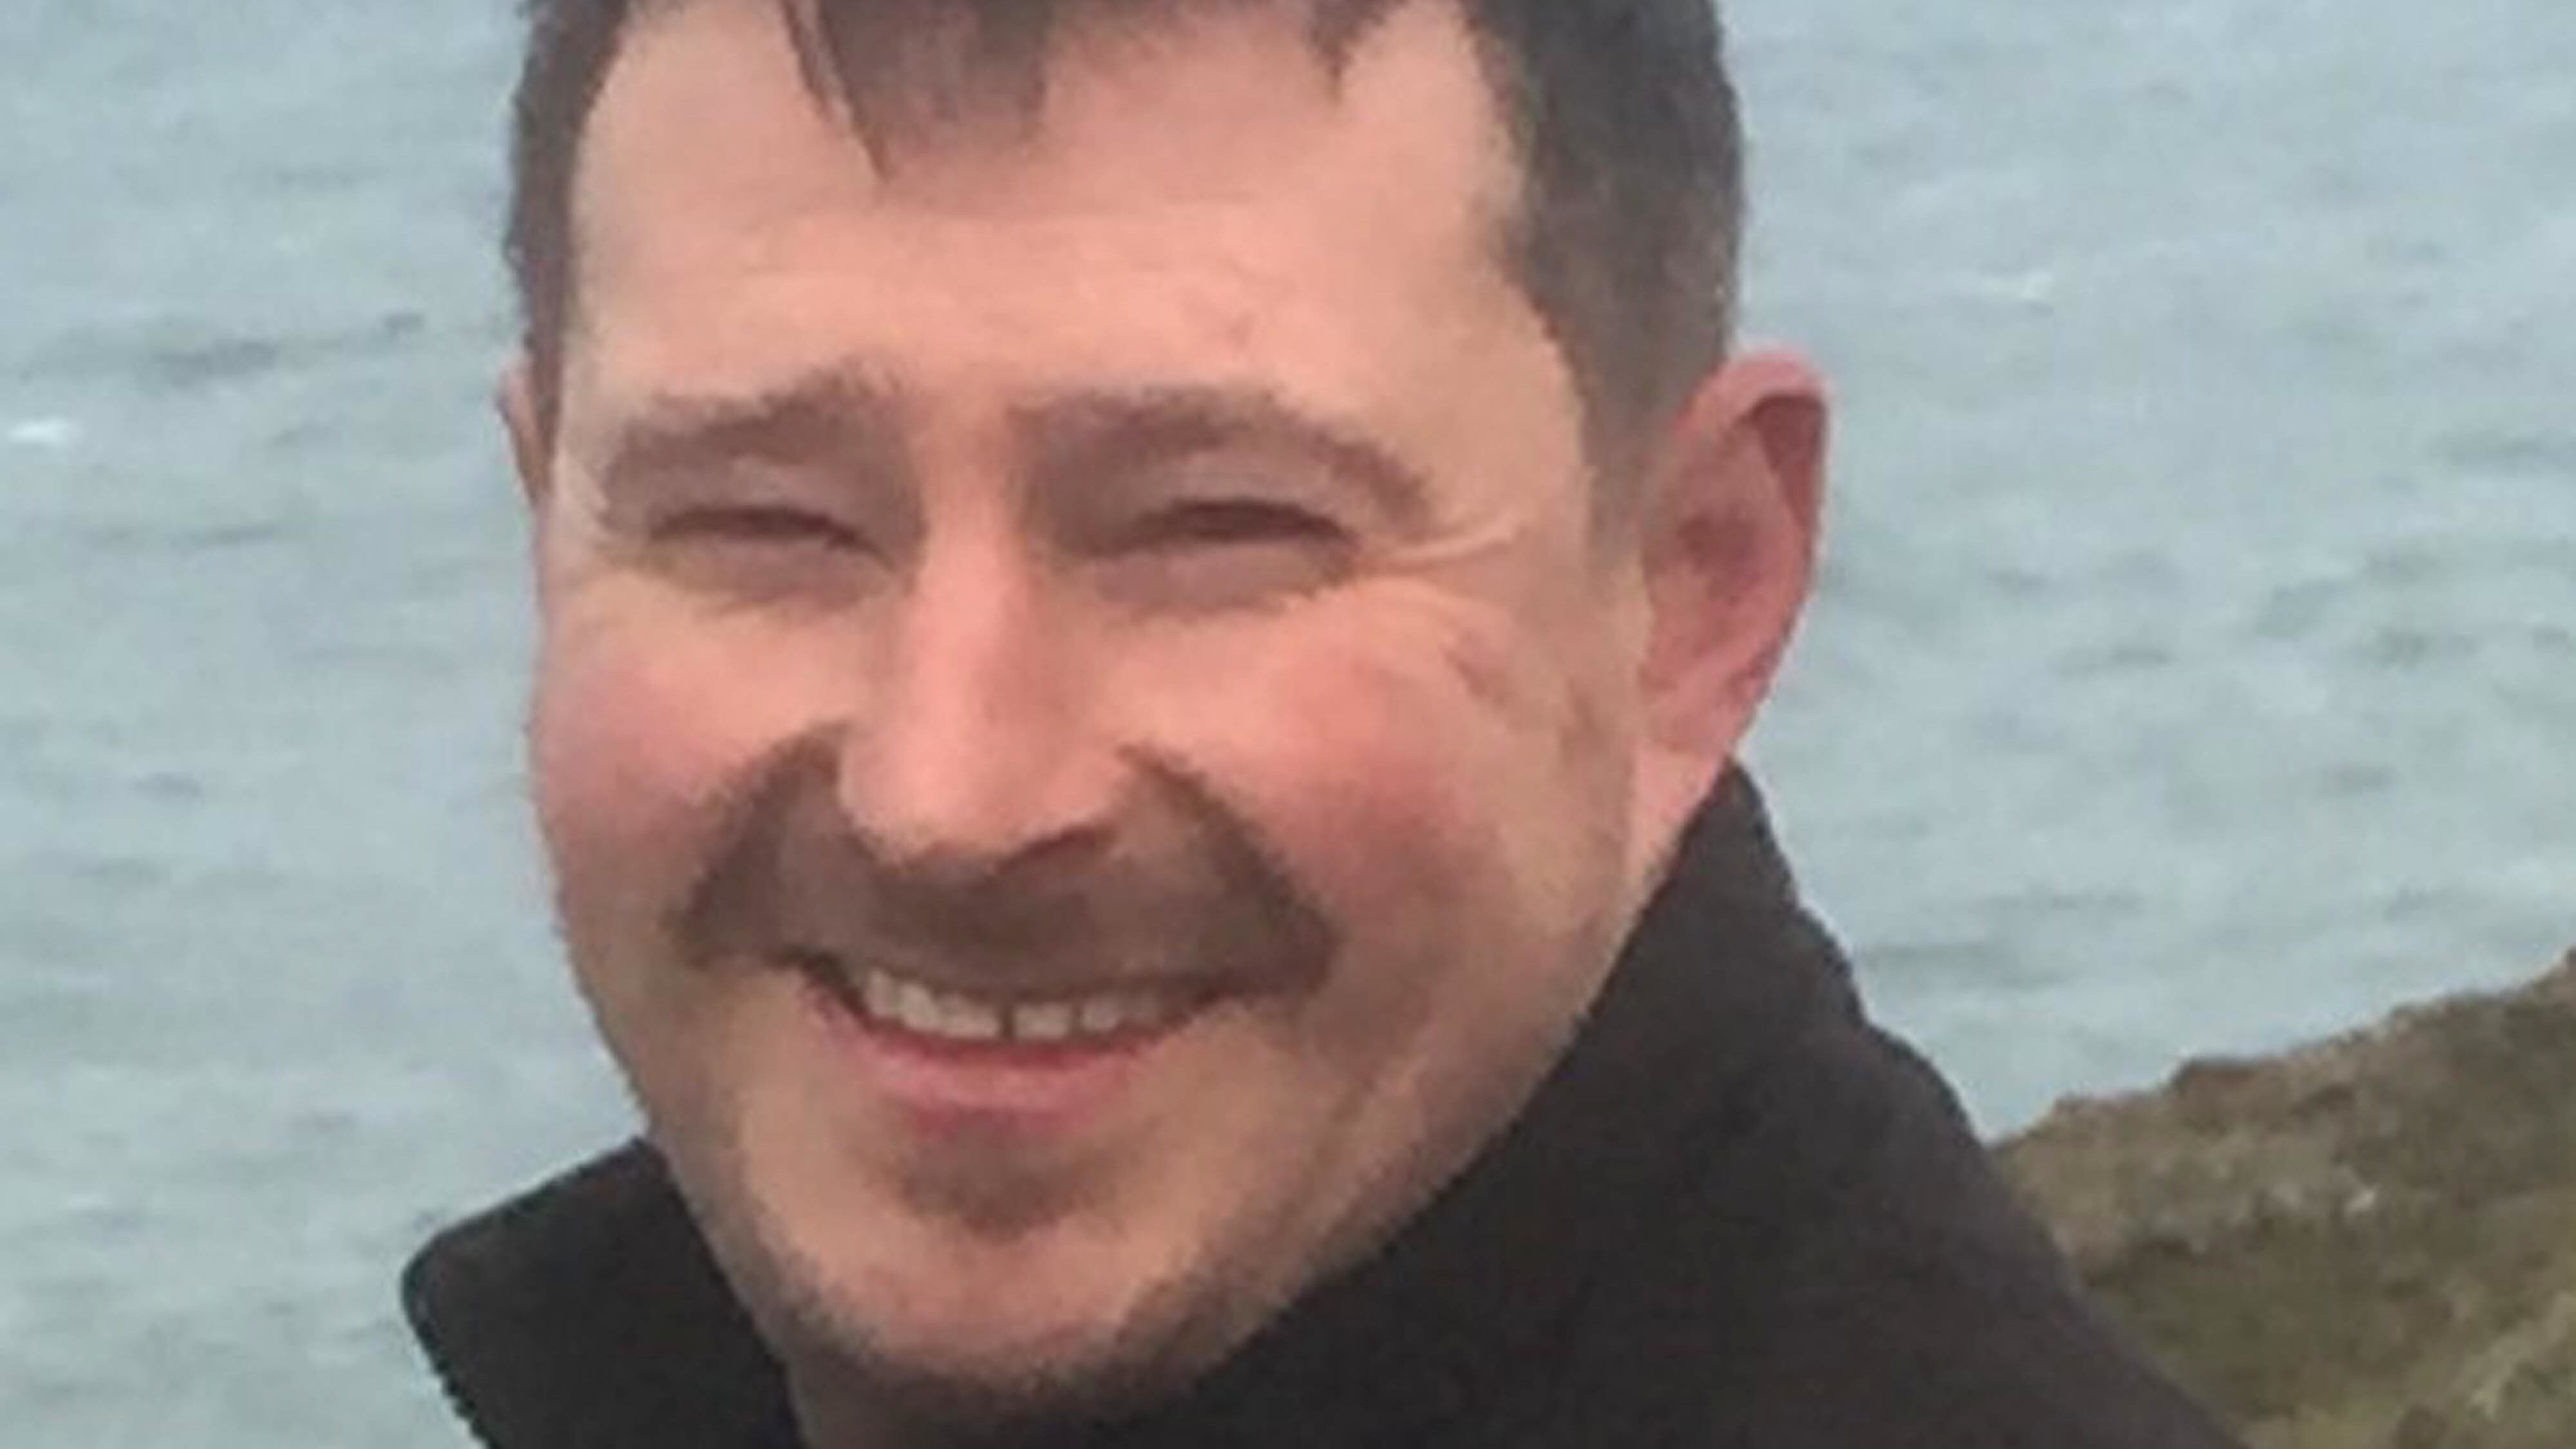 Hywel Morgan died after rescuing a group of children caught in a riptide